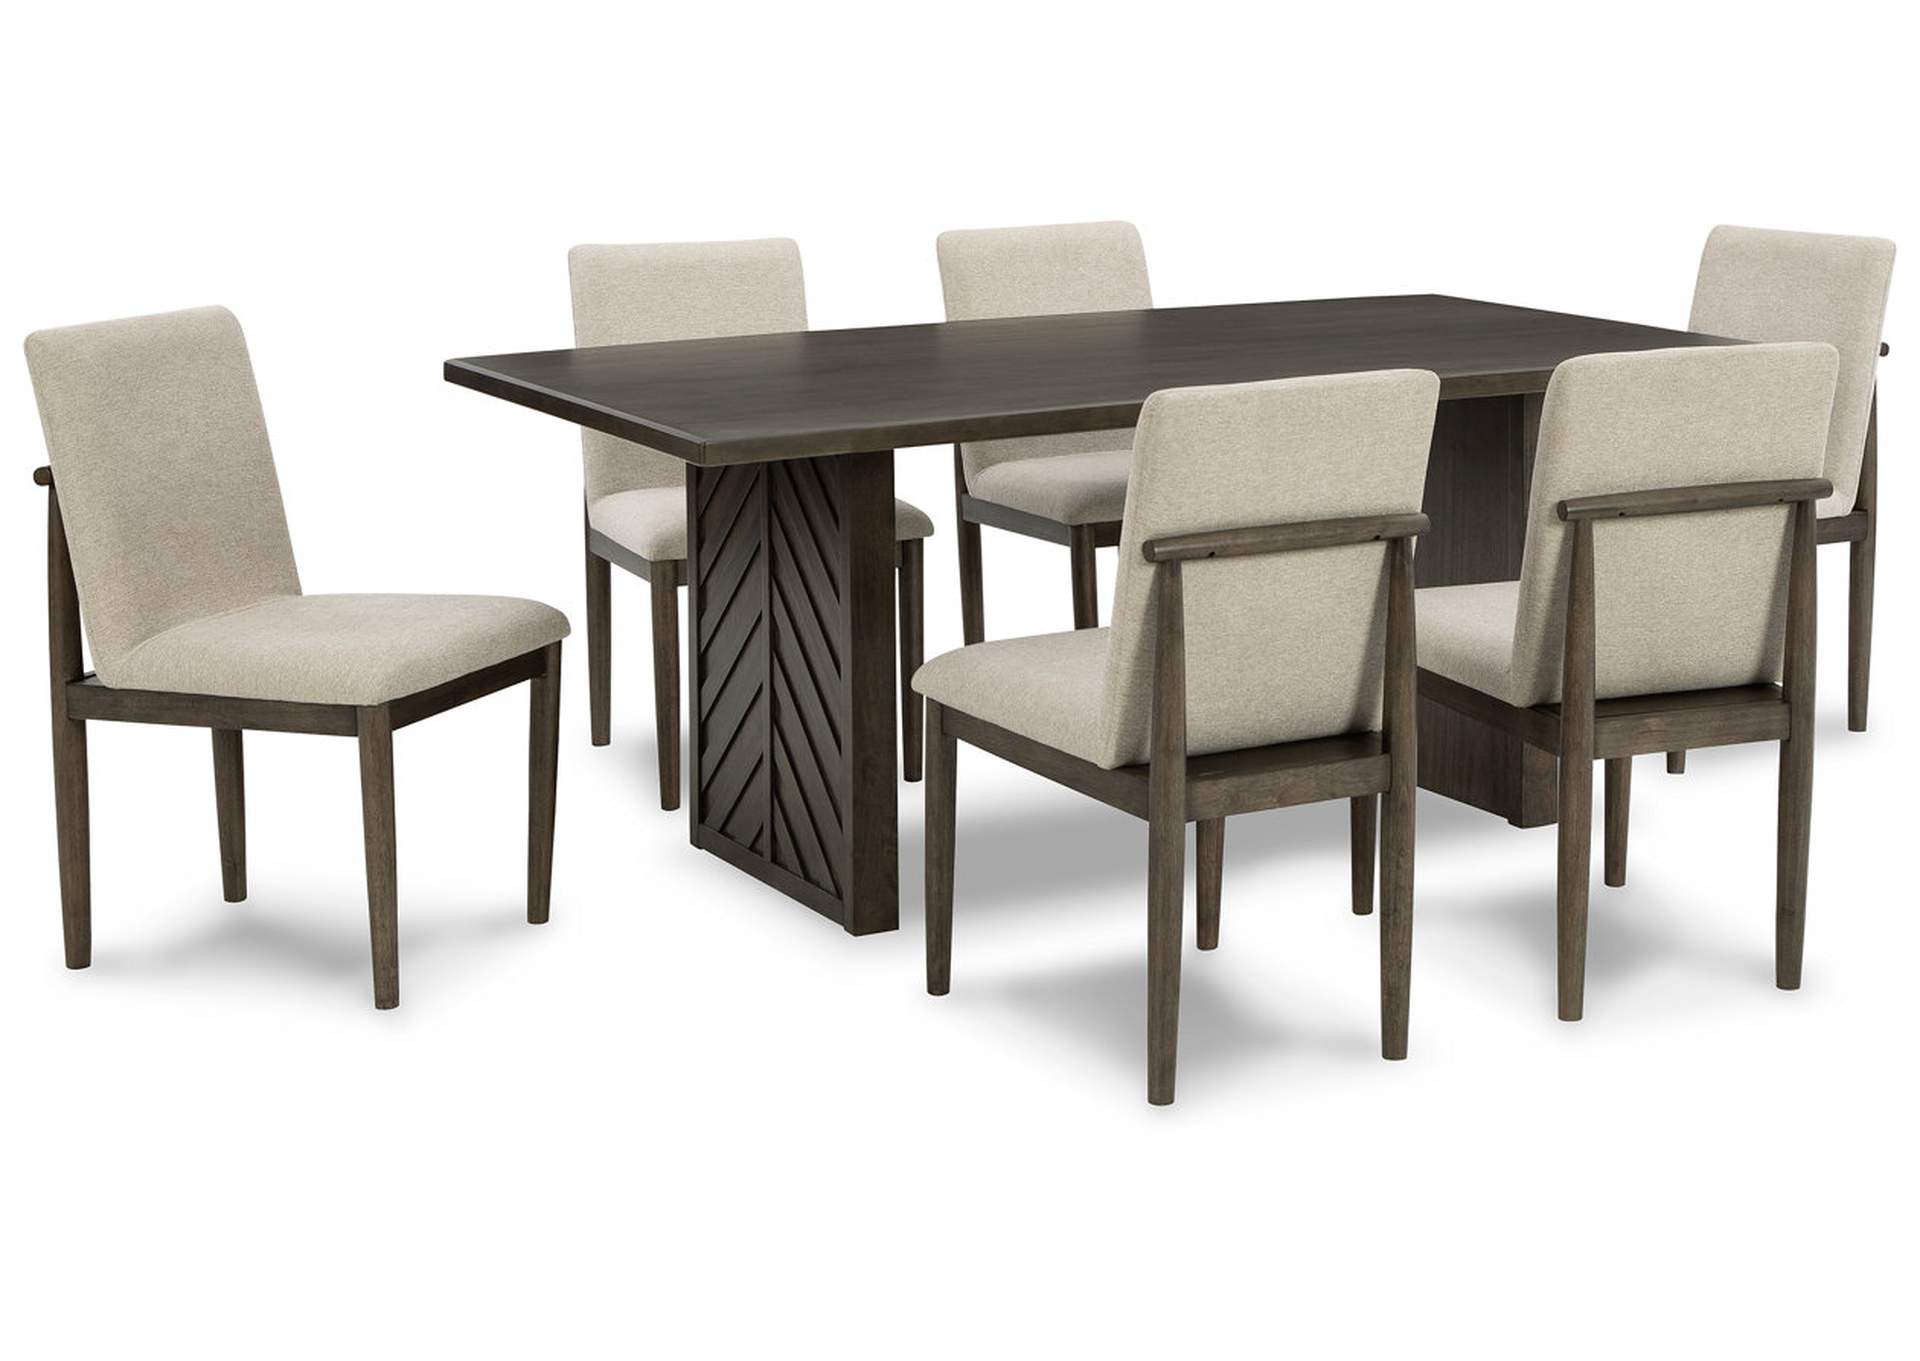 Arkenton Dining Table and 6 Chairs,Ashley